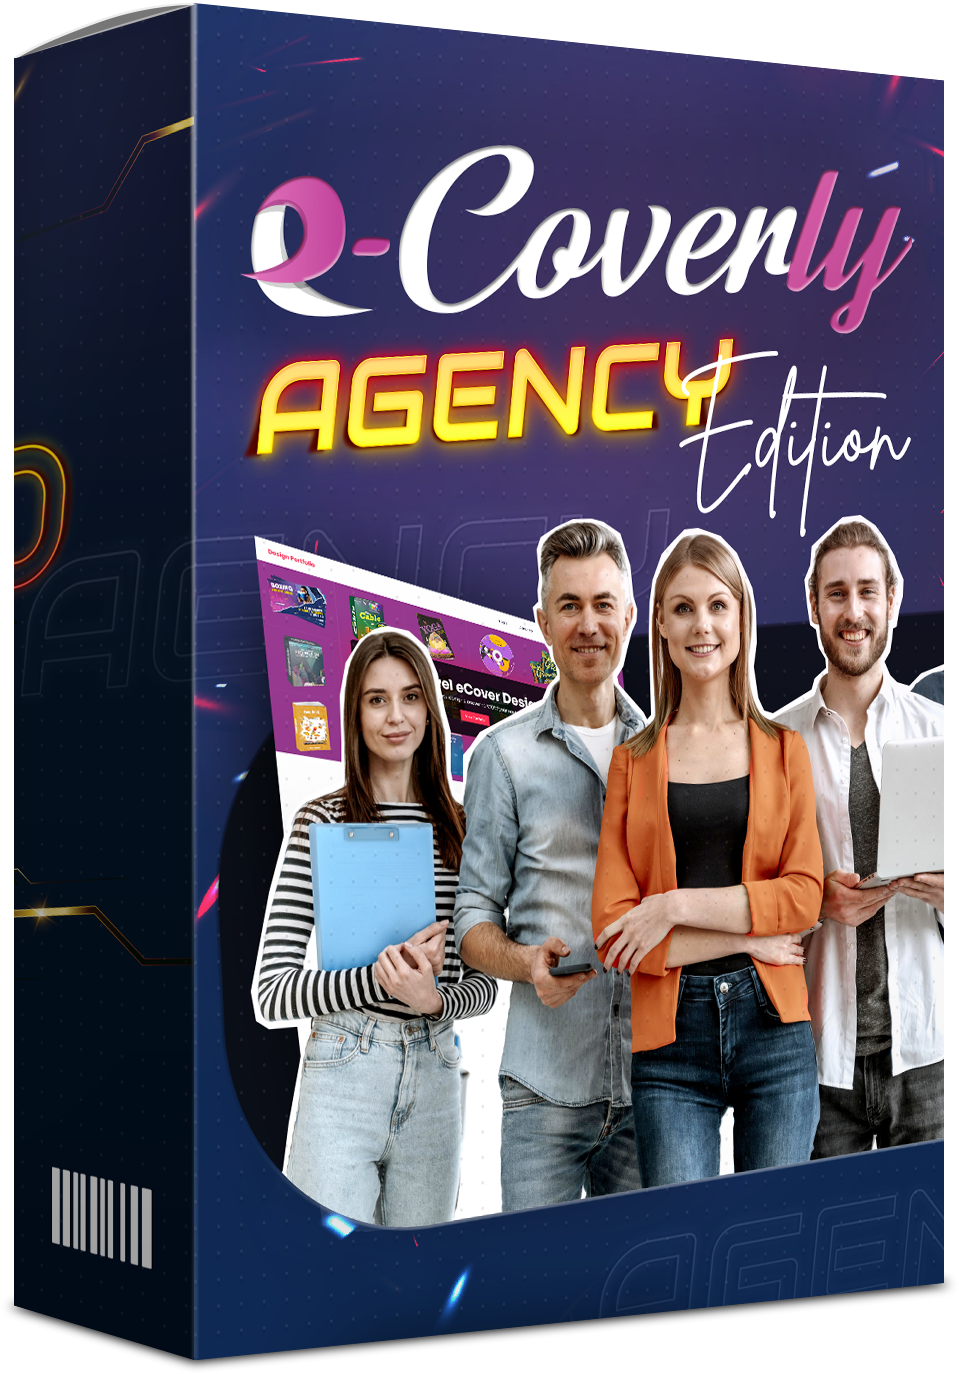 Upsell 5: Agency Edition